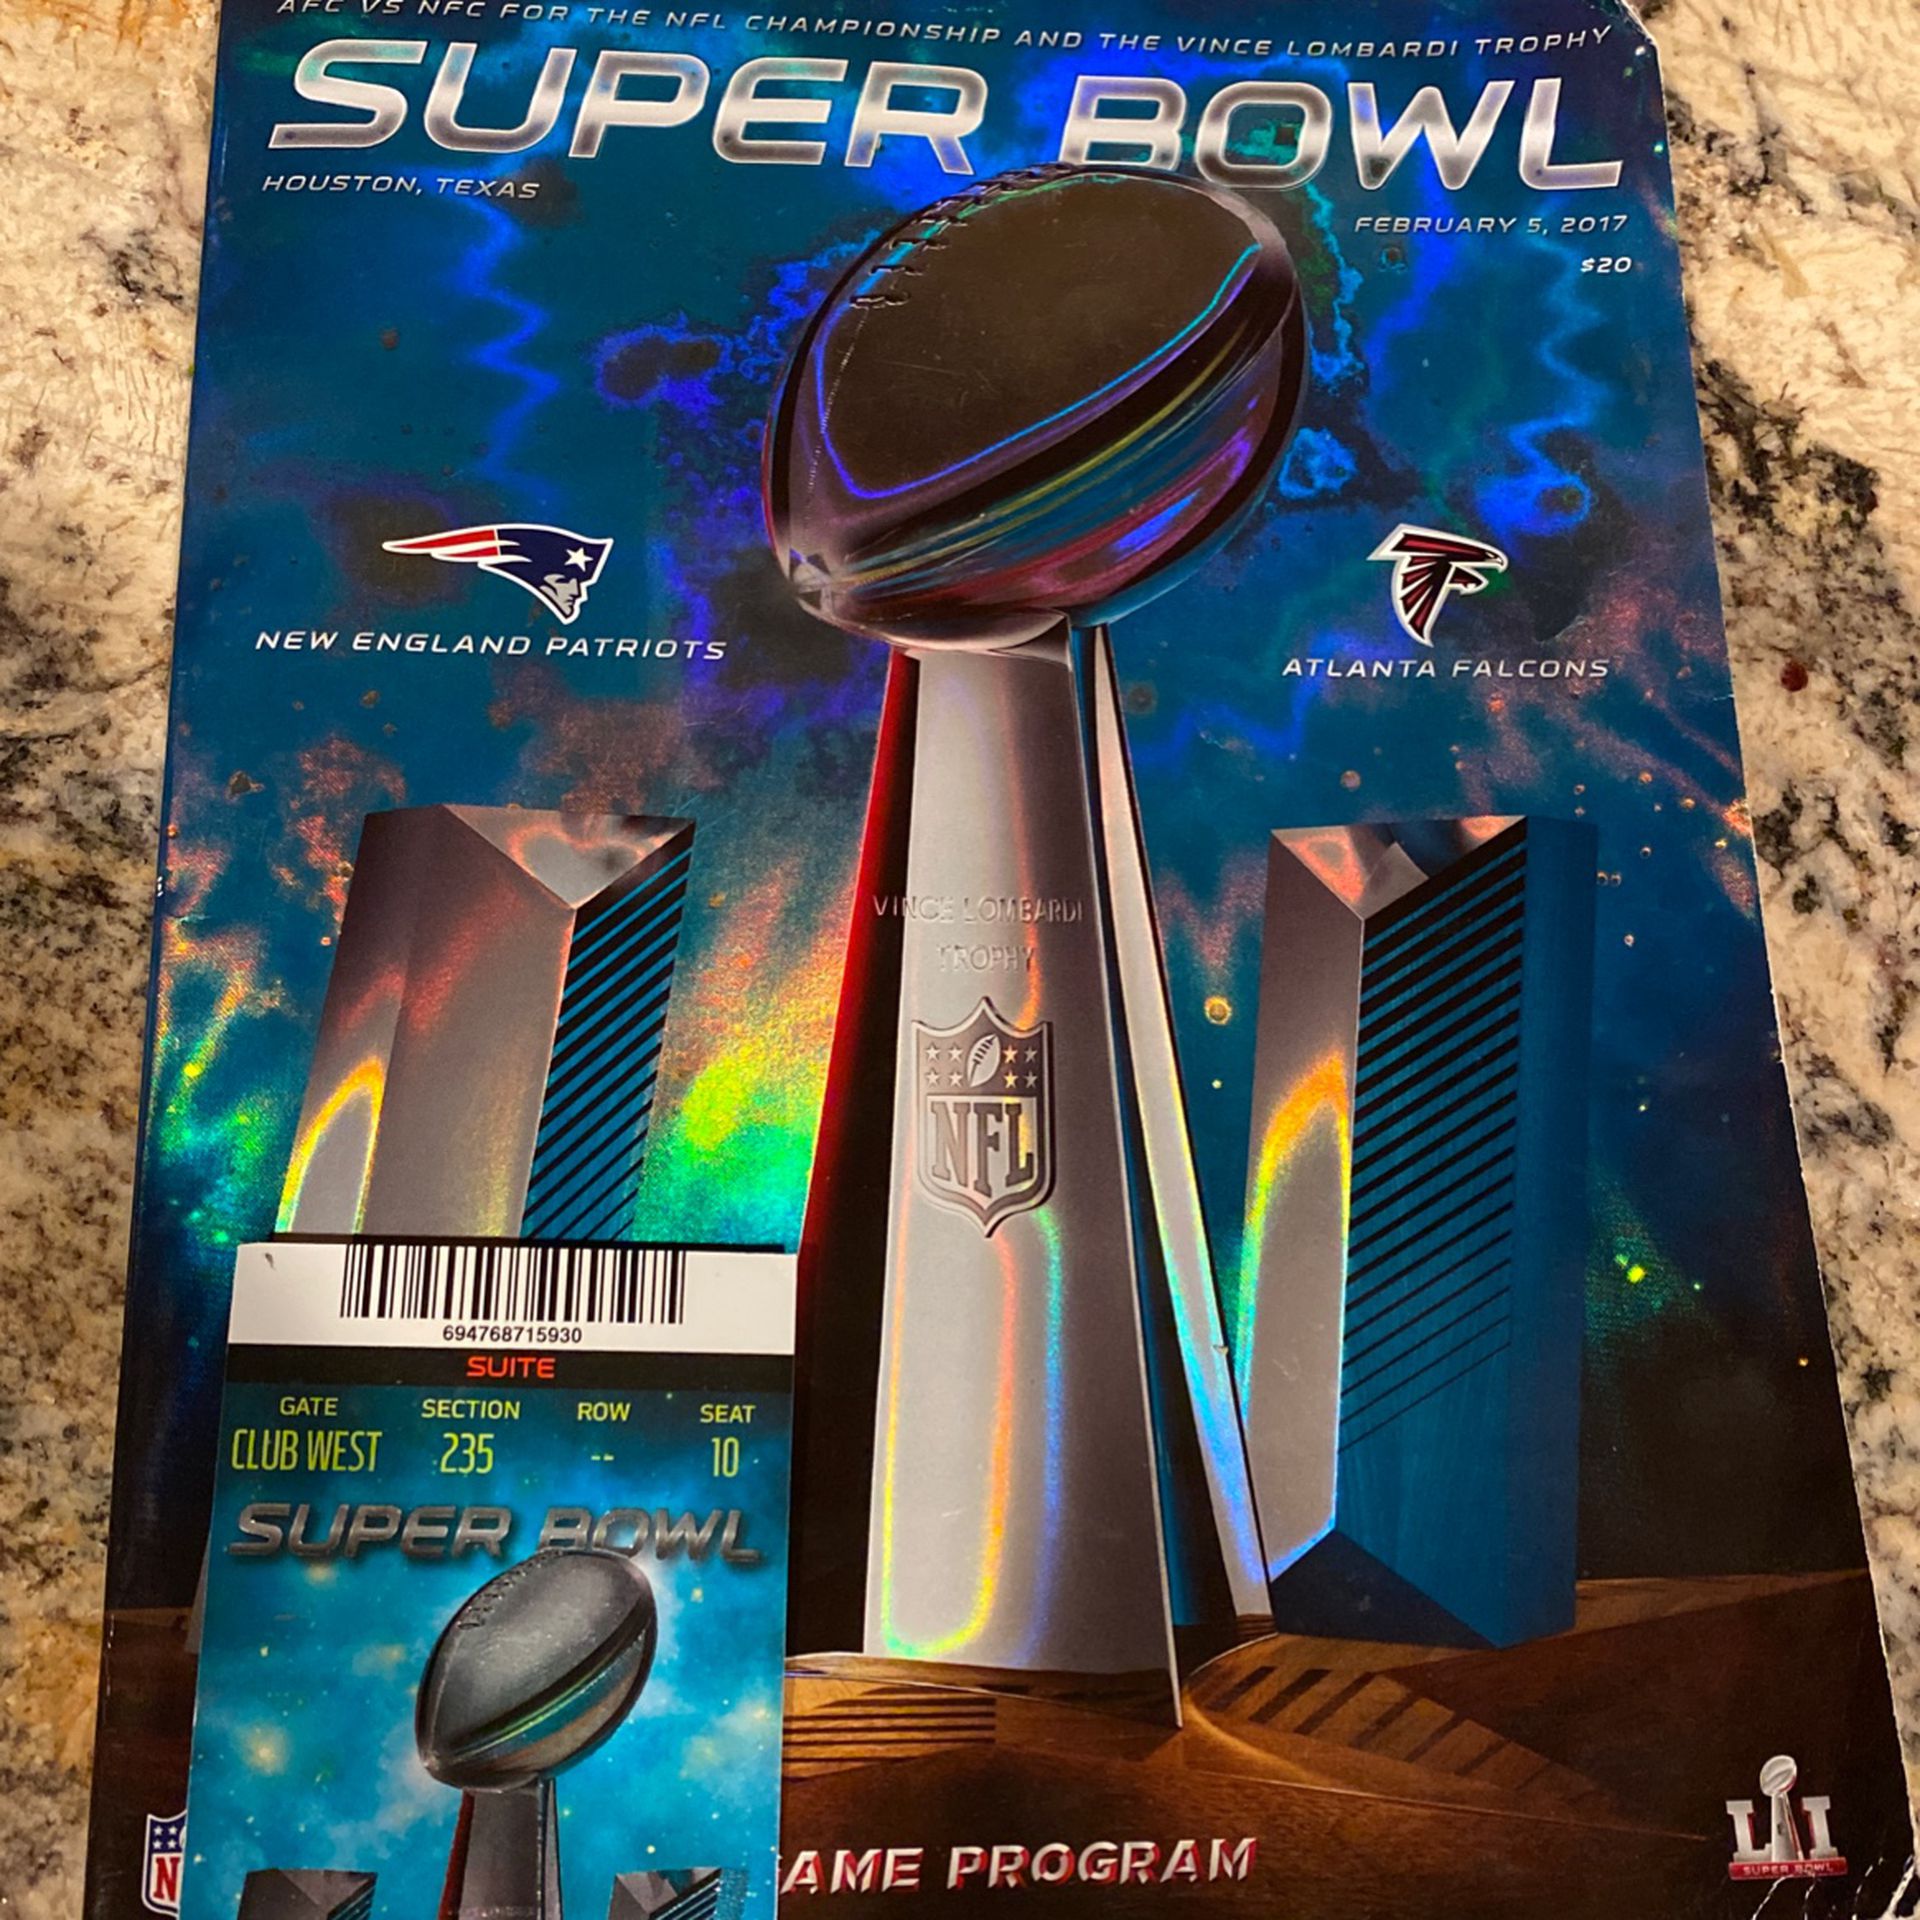 Super Bowl 51 Program And 2 Suite Tickets